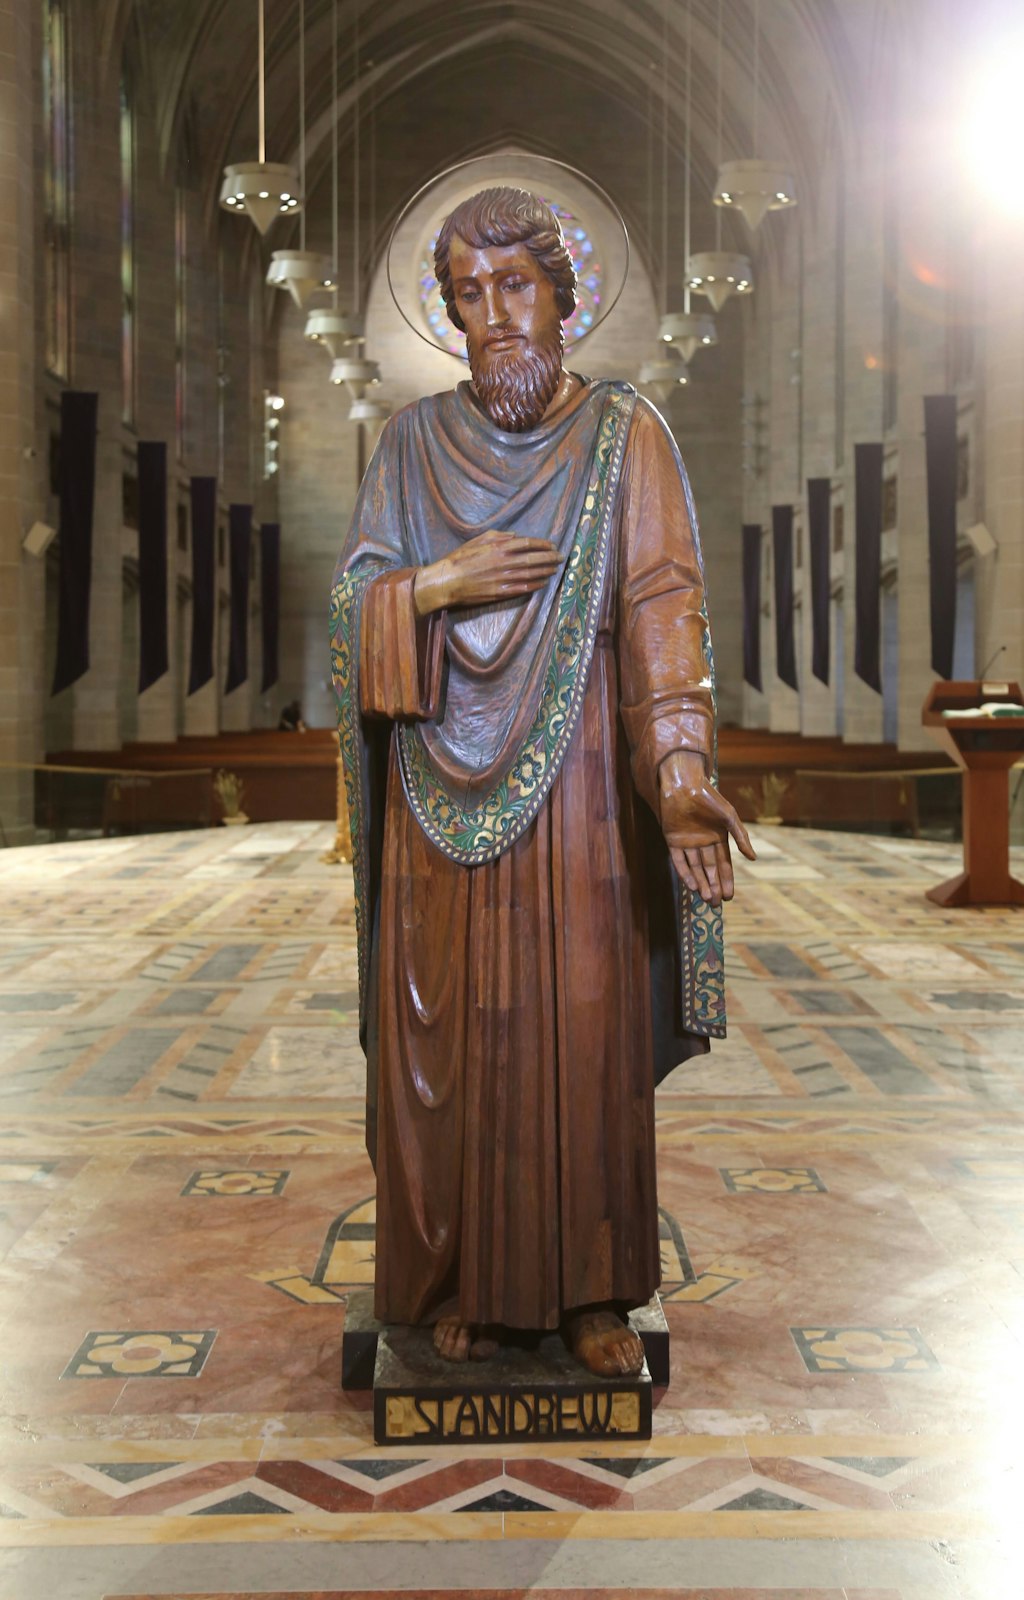 The statue of St. Andrew is pictured. Each of the statues were carved from a single tree trunk and were rescued from St. Benedict Church in Highland Park, which closed in 2014. After undergoing extensive restoration, the statues were installed in the cathedral's nave in December.